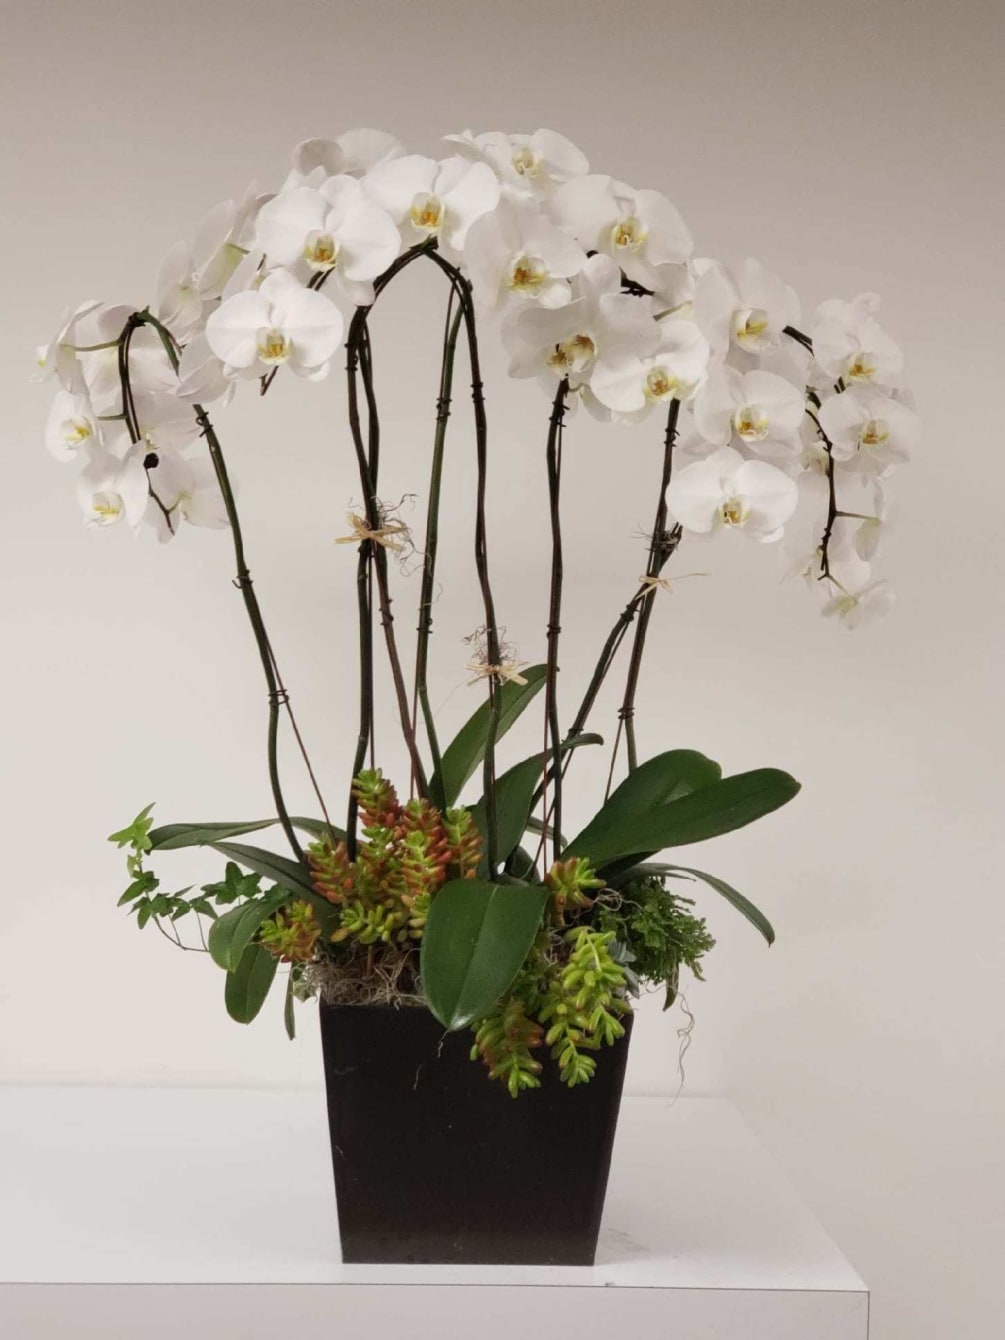 A large display of orchids mixed in harmony with succulent plants. This